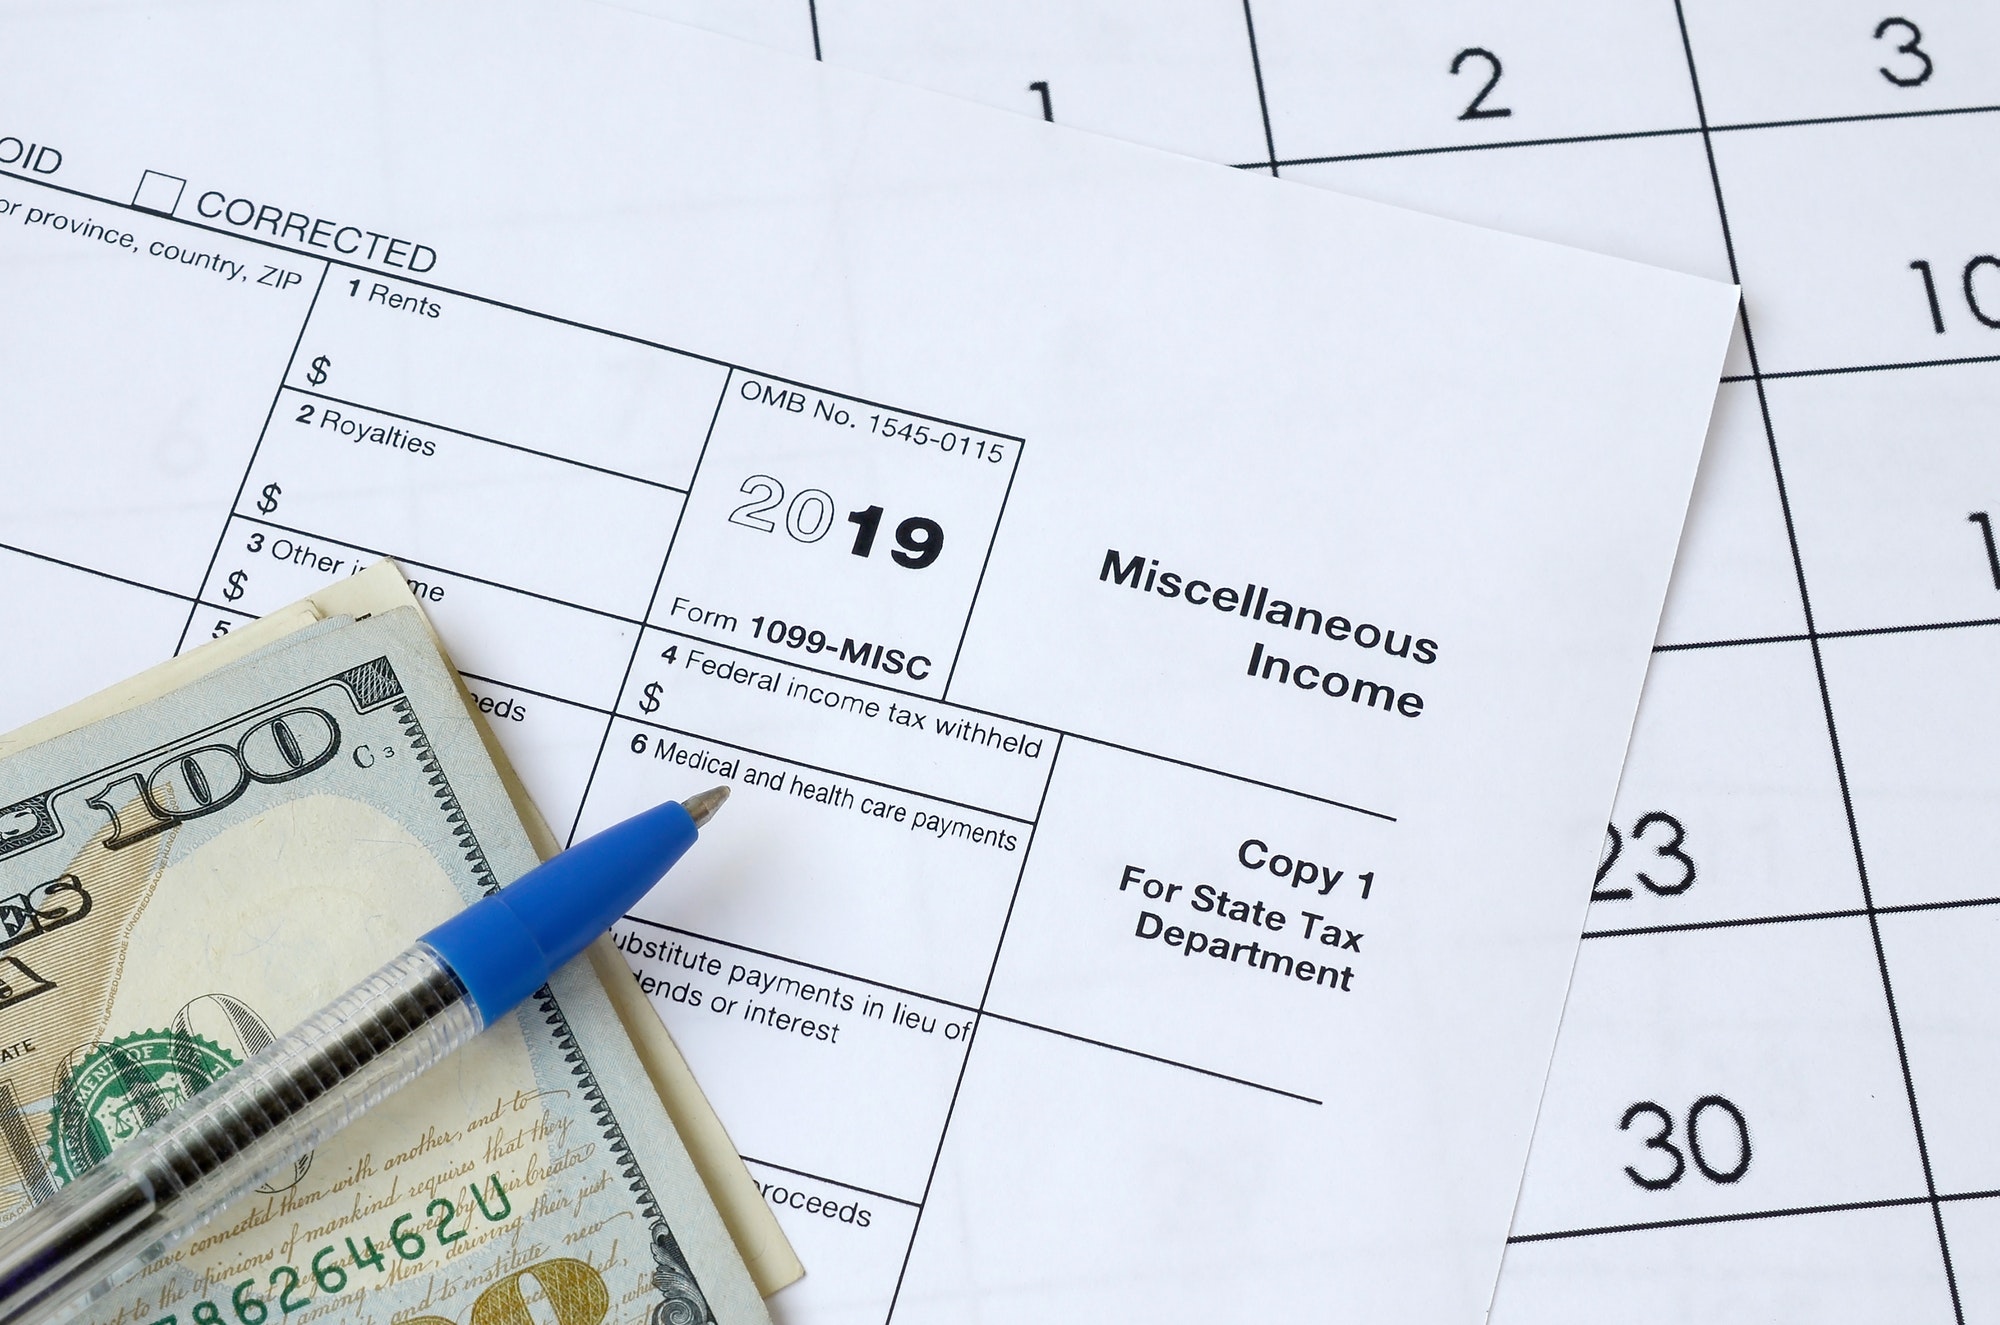 Form 1099-misc Miscellaneous income and blue pen with dollar bills lies on office calendar